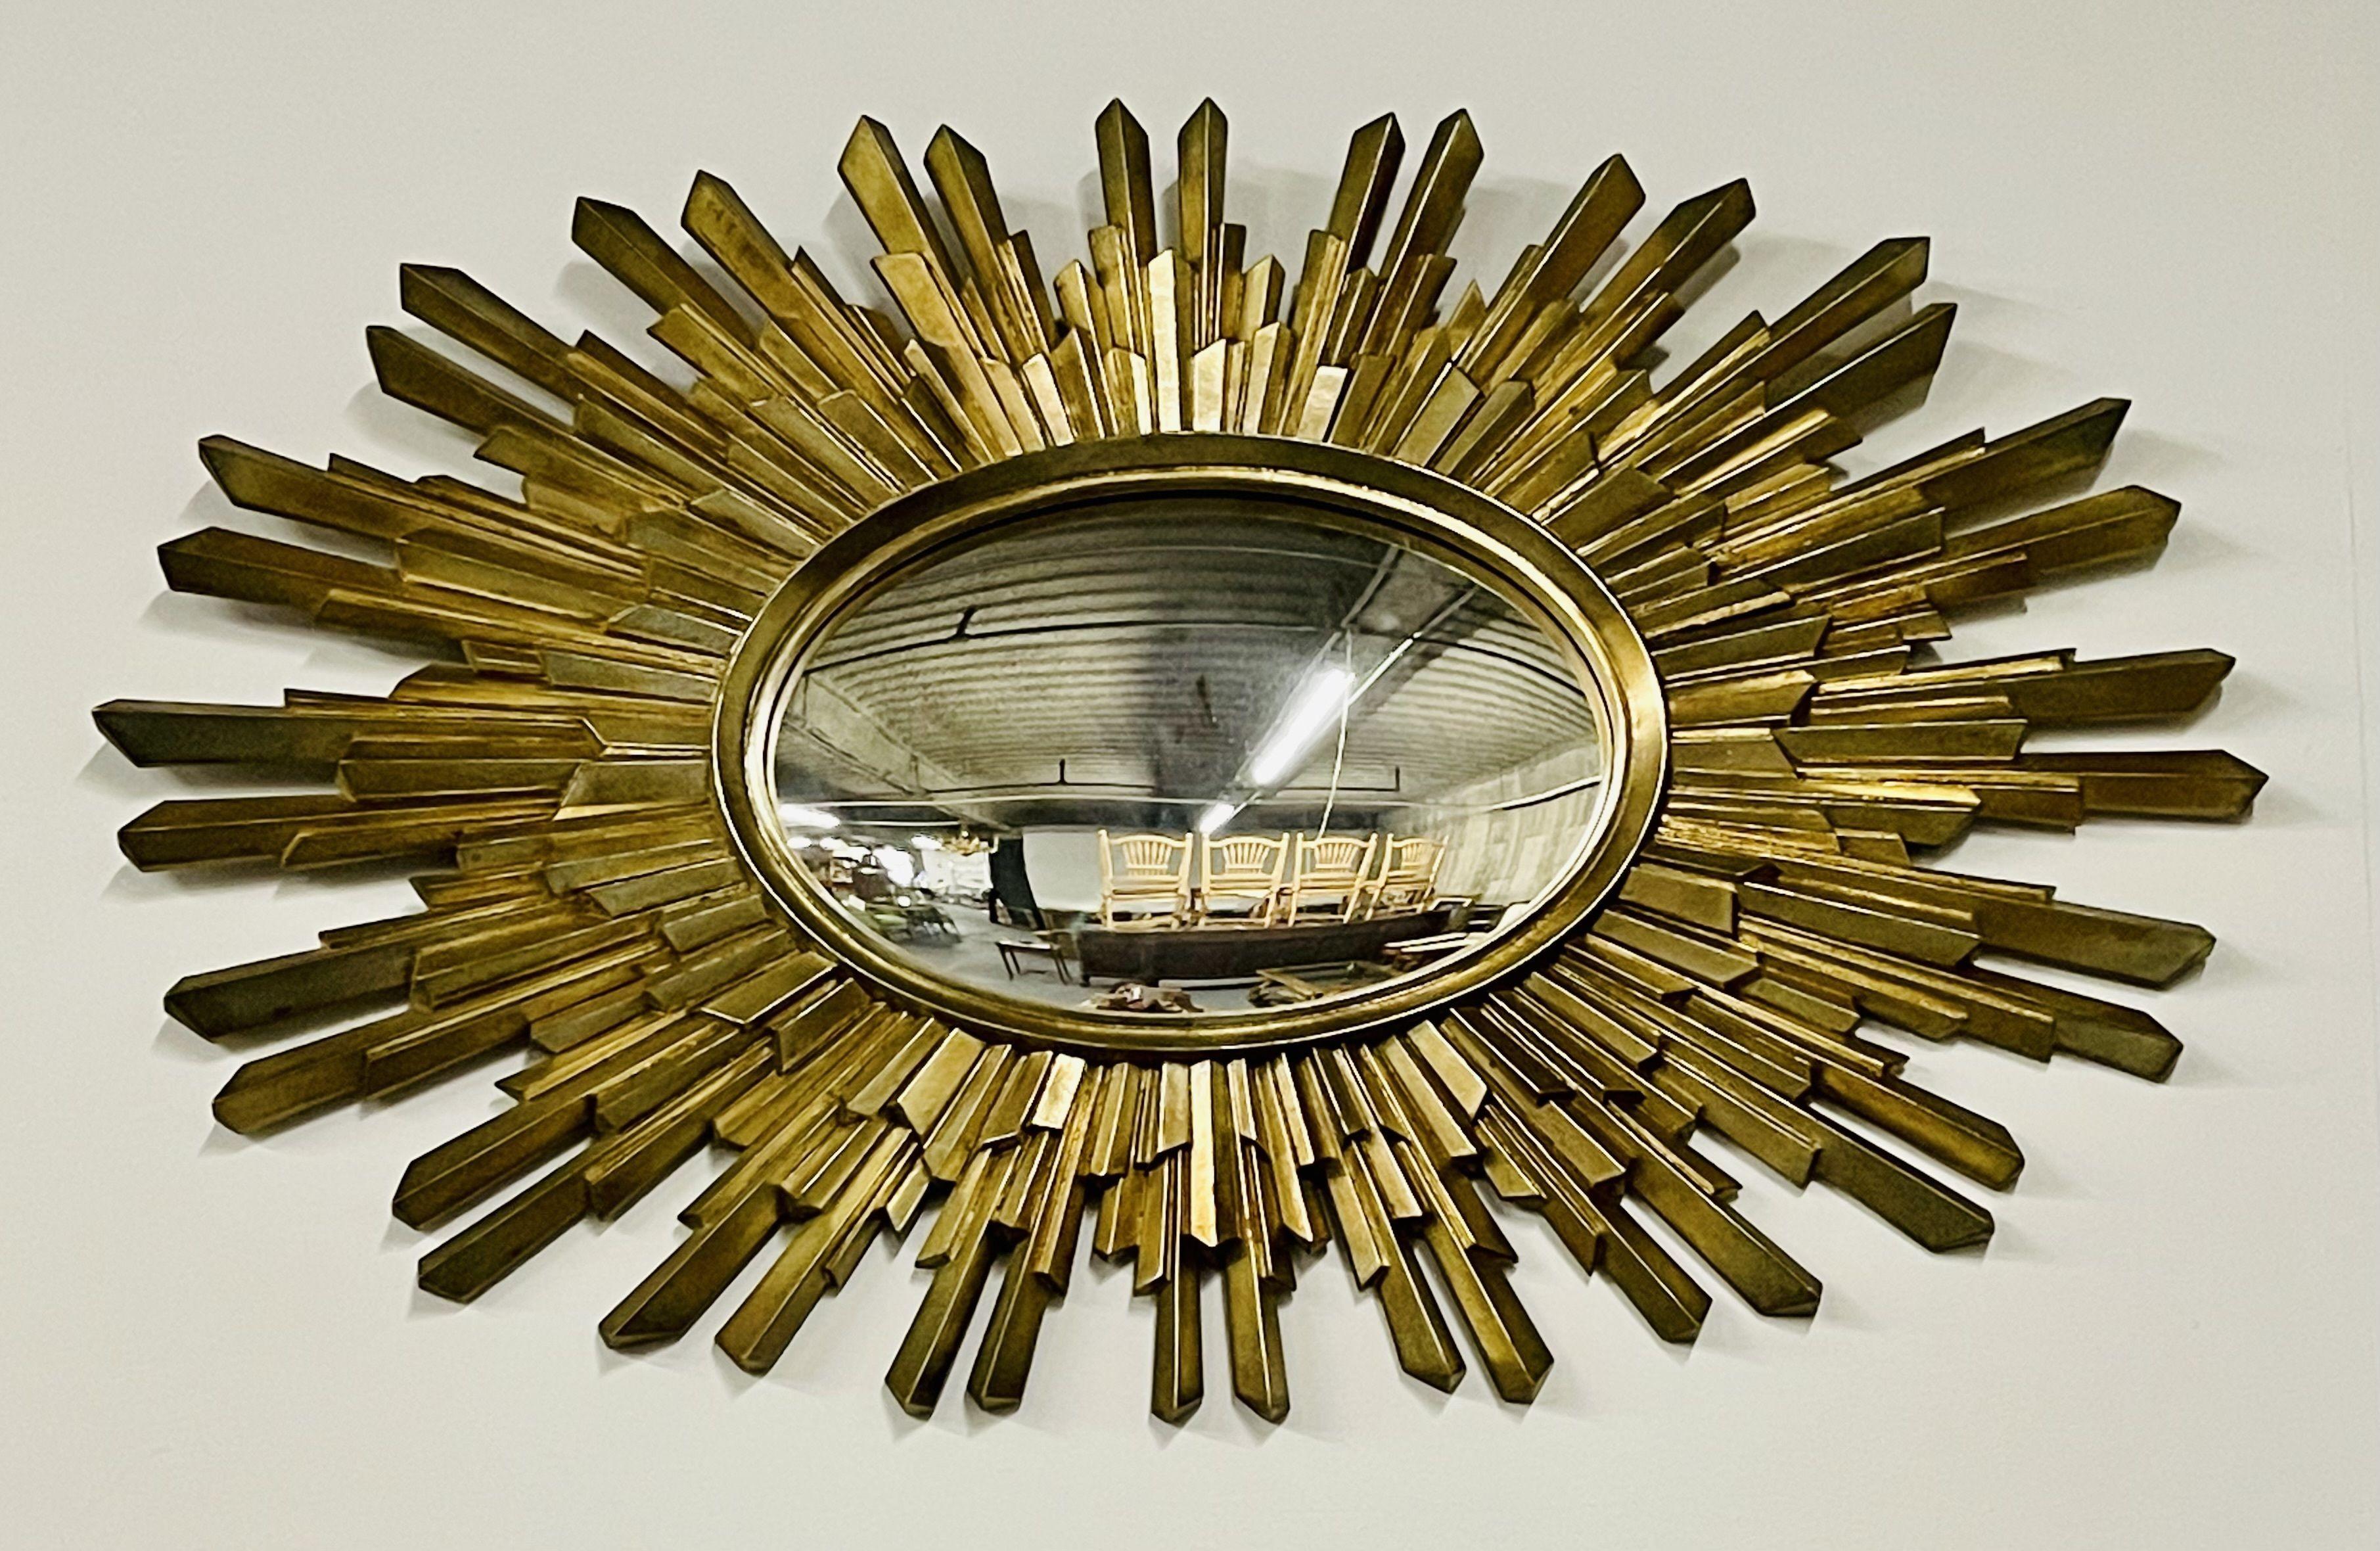 Mid-Century Modern gilt gold sunburst mirror.

Several photographs shot directly from Dr. Shawn Garber's home on the Gold Coast of Long Island. Part of an extensive collection seen only in our showroom.

Provenance:
The Entire Collection of